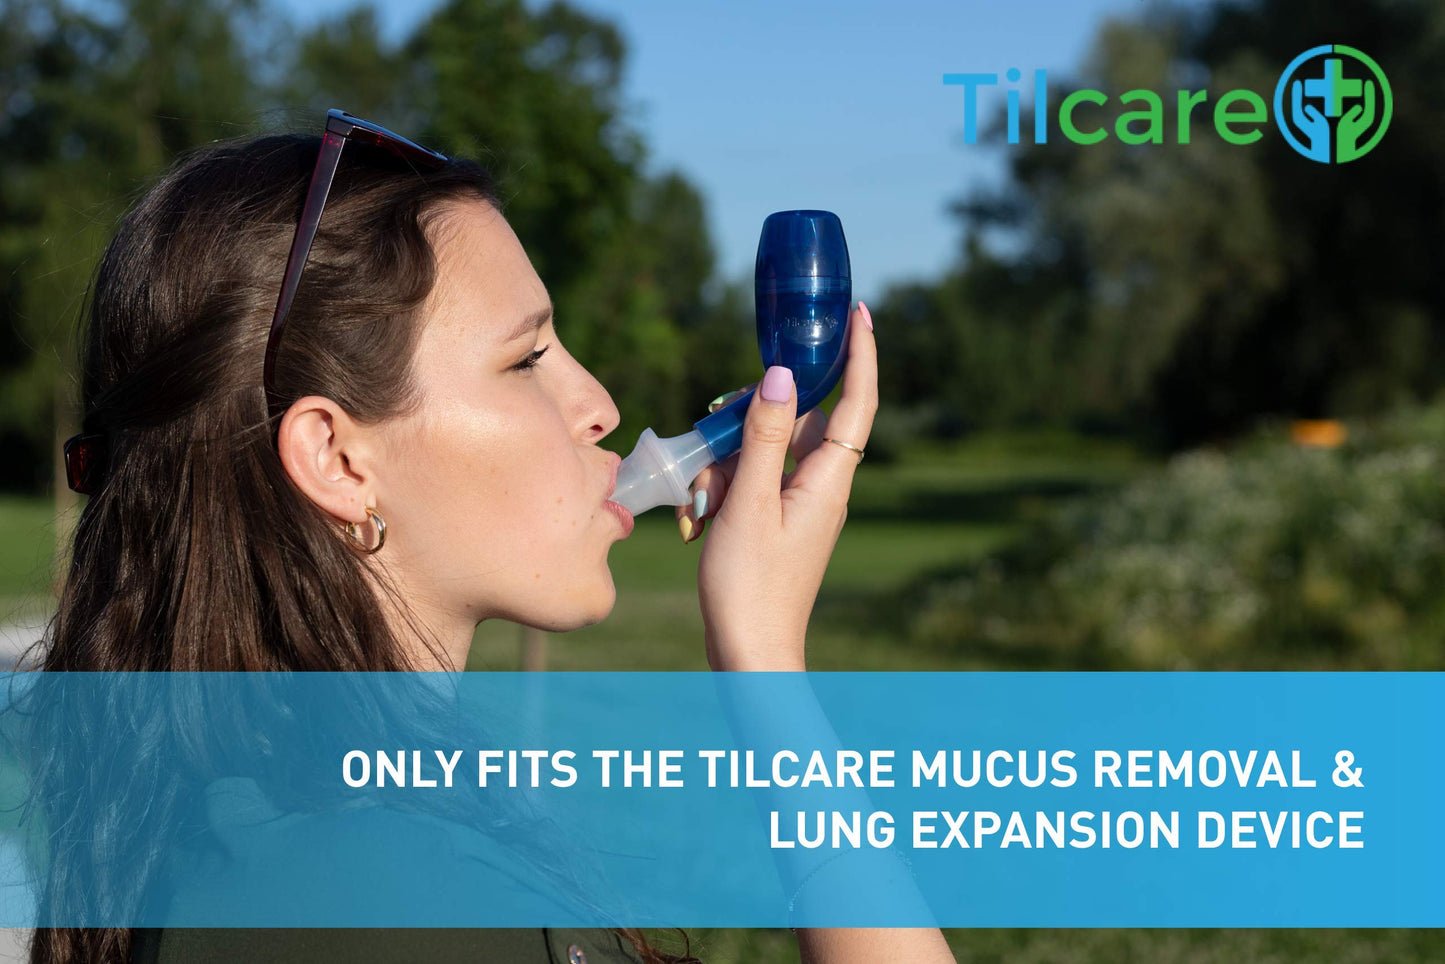 Bacterial & Viral Filters Kit for Mucus Relief Cleanser & Lung Expansion Exerciser by Tilcare - Cough Assist Filter - Cleanses the air to Aid with Therapy and keeps your device clean -10 filters added